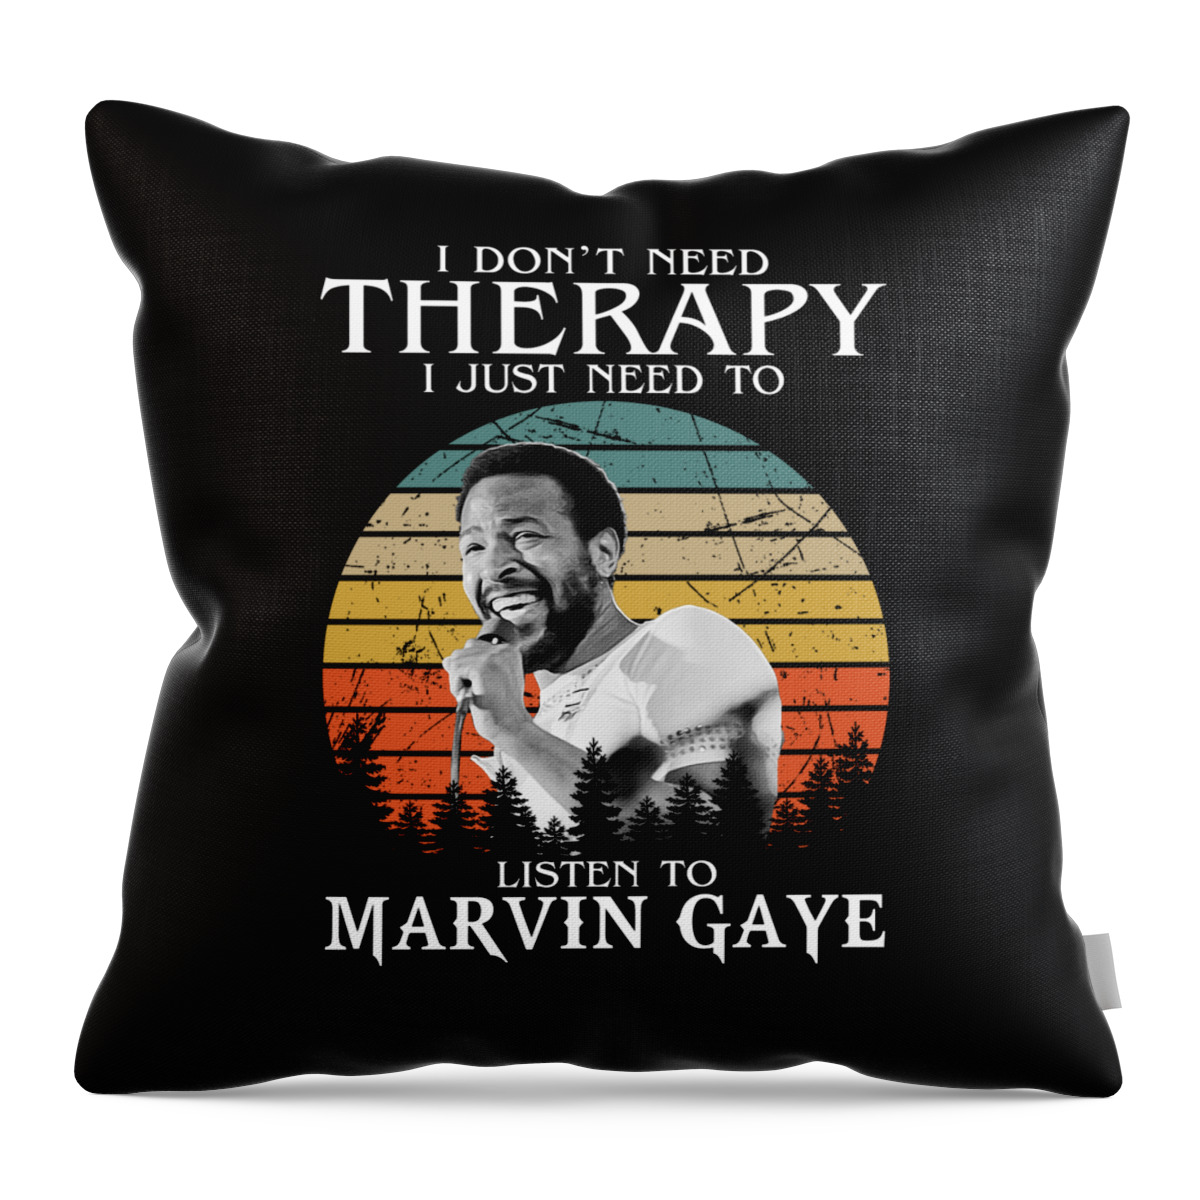 Marvin Gaye Throw Pillow featuring the digital art Funny Therapy I Just Need To Listen To Marvin Gaye by Notorious Artist